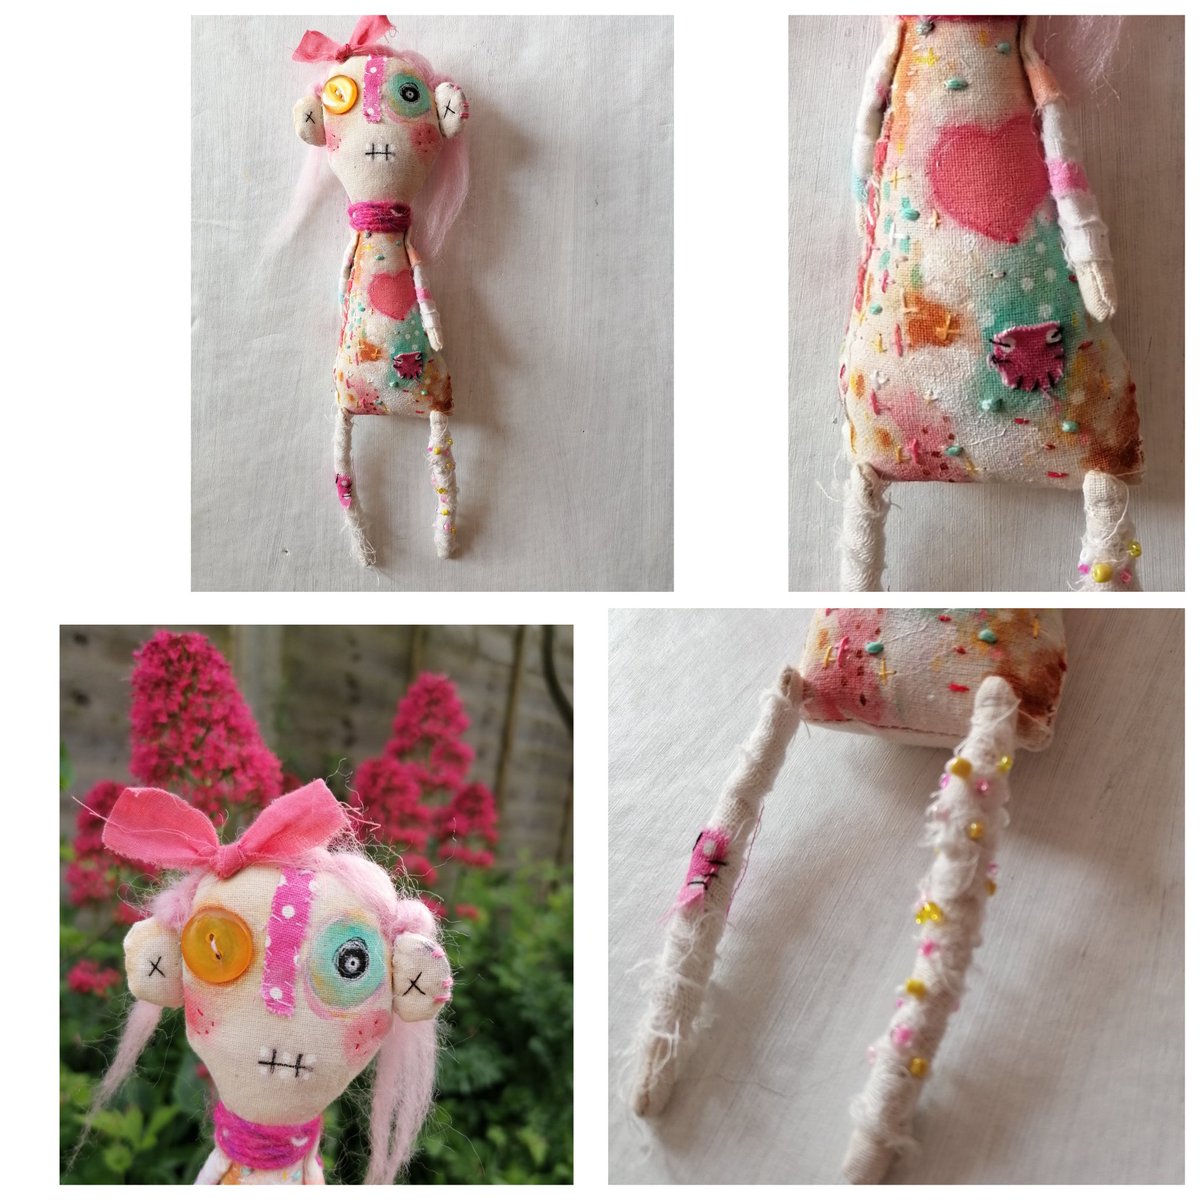 Good morning #earlybiz, Sharing my latest little lady, a cute little pink hair with a yellow button eye 🩷💛 She is a colourful cutie and is available on my website. littlebirdofparadise.bigcartel.com/product/yellow… #CraftBizParty #mhhsbd